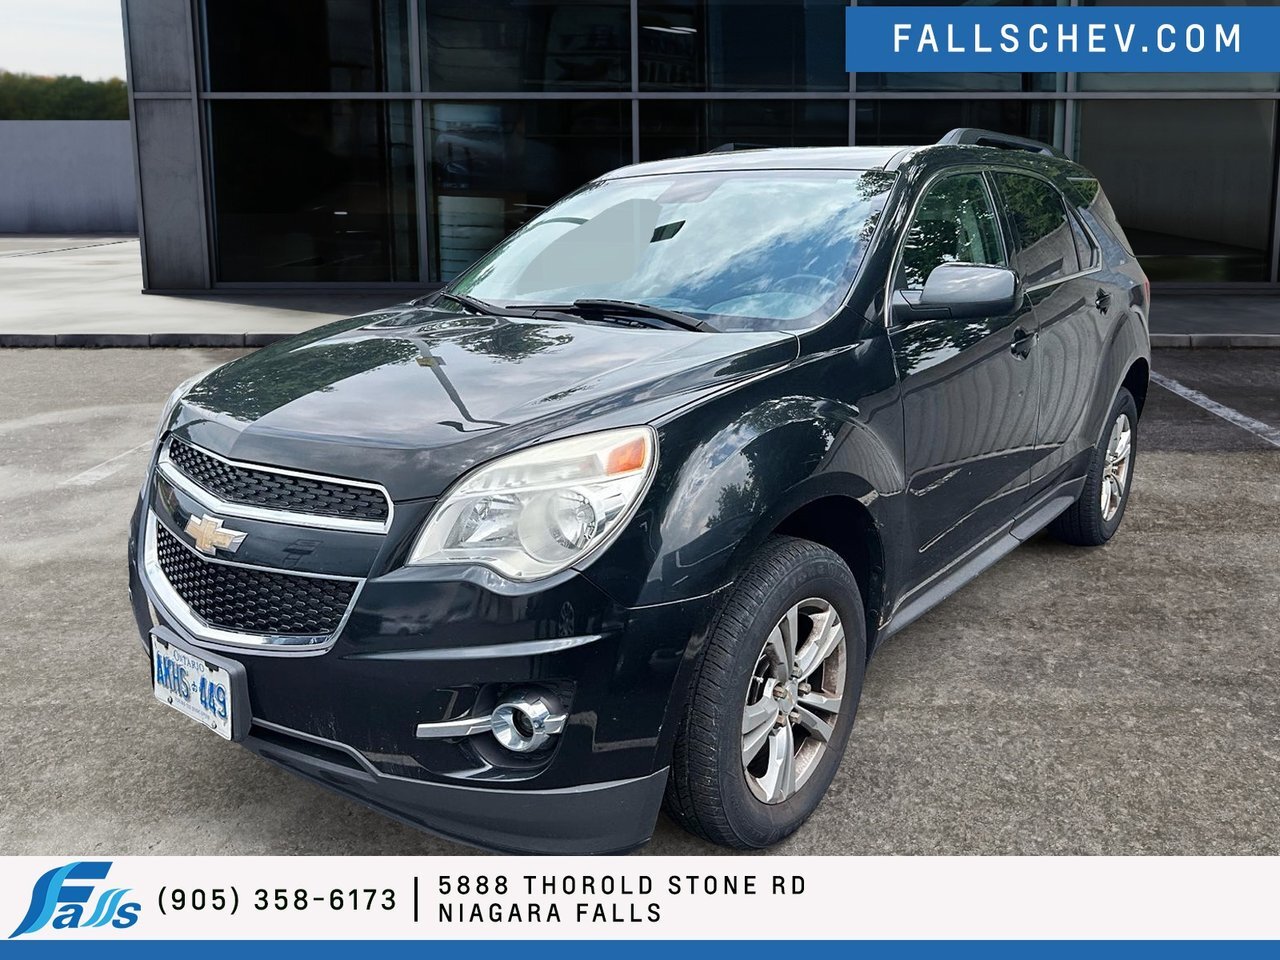 2013 Chevrolet Equinox LT **VEHICLE BEING SOLD AS IS**